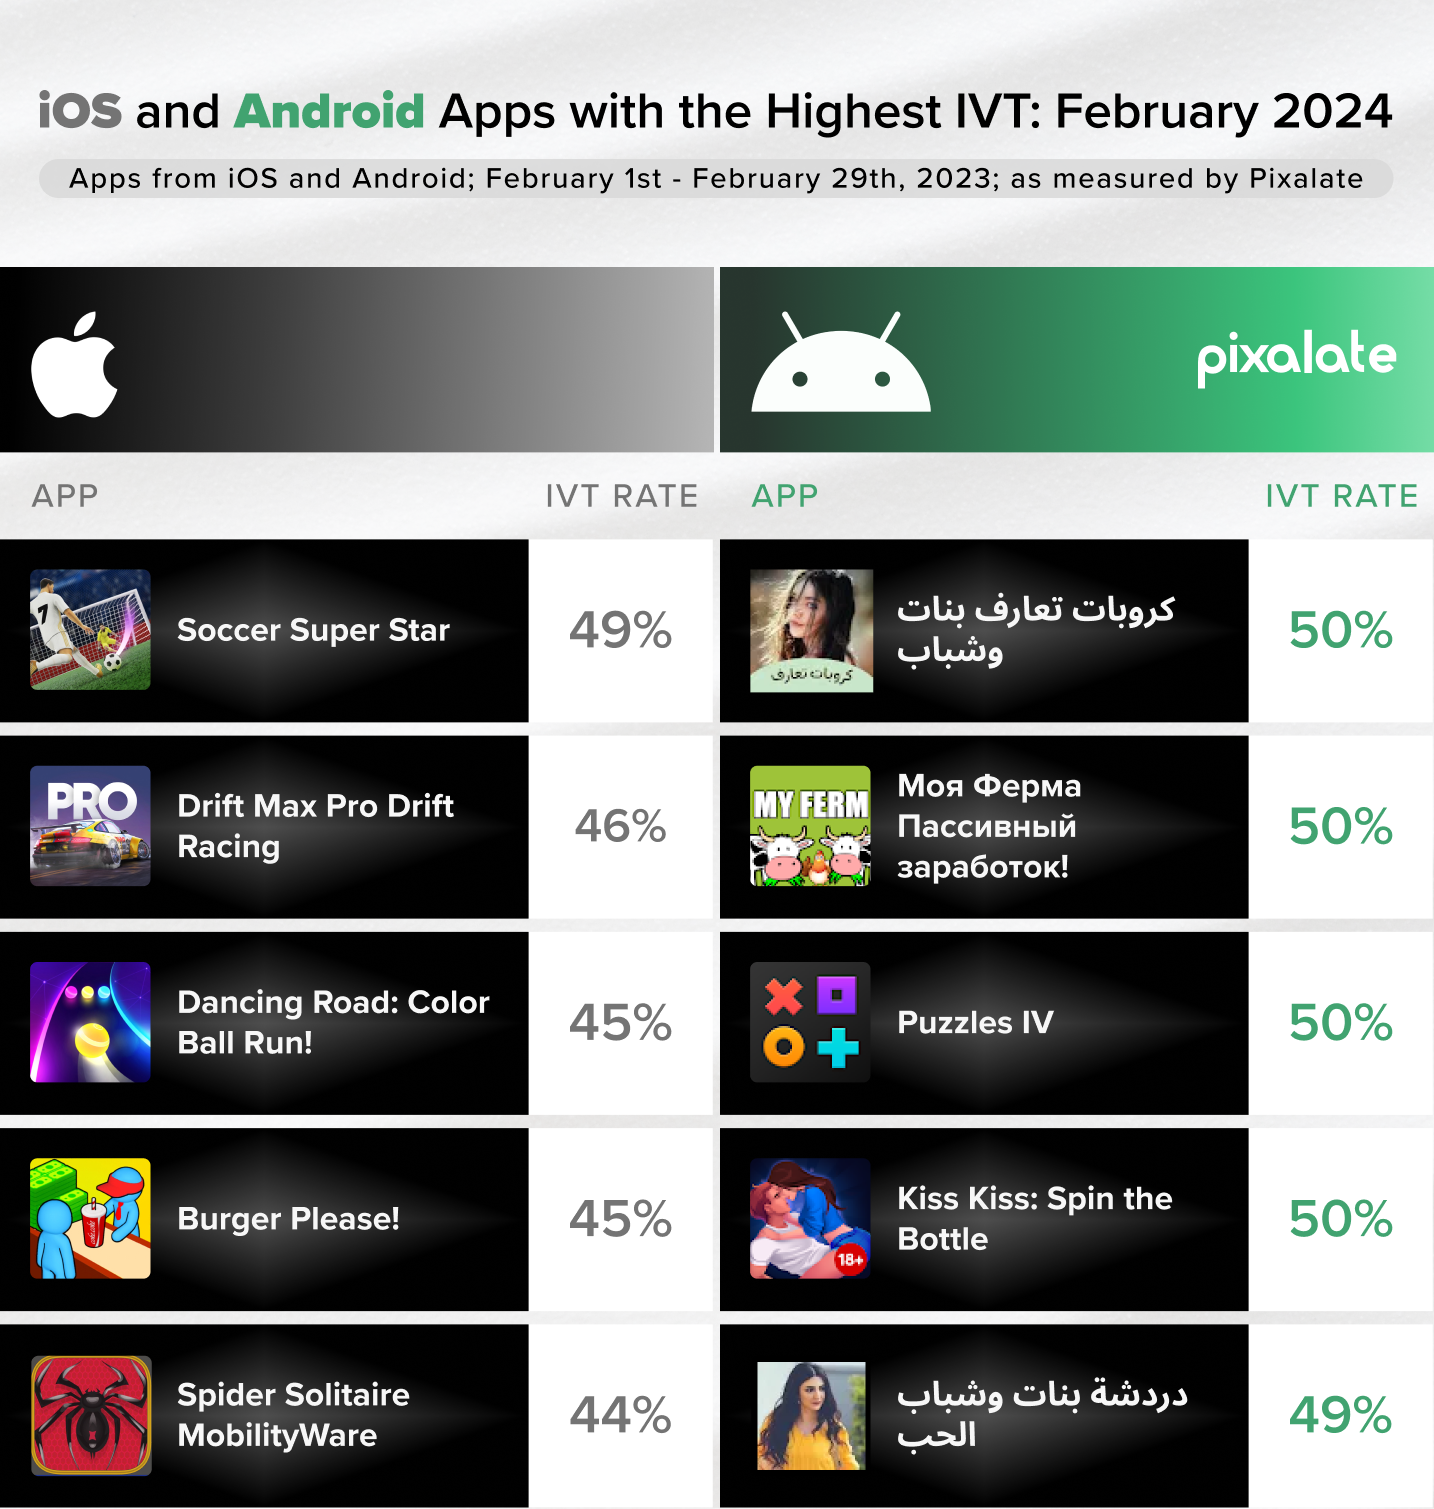 Top Mobile Apps Impacted by IVT - February 2024